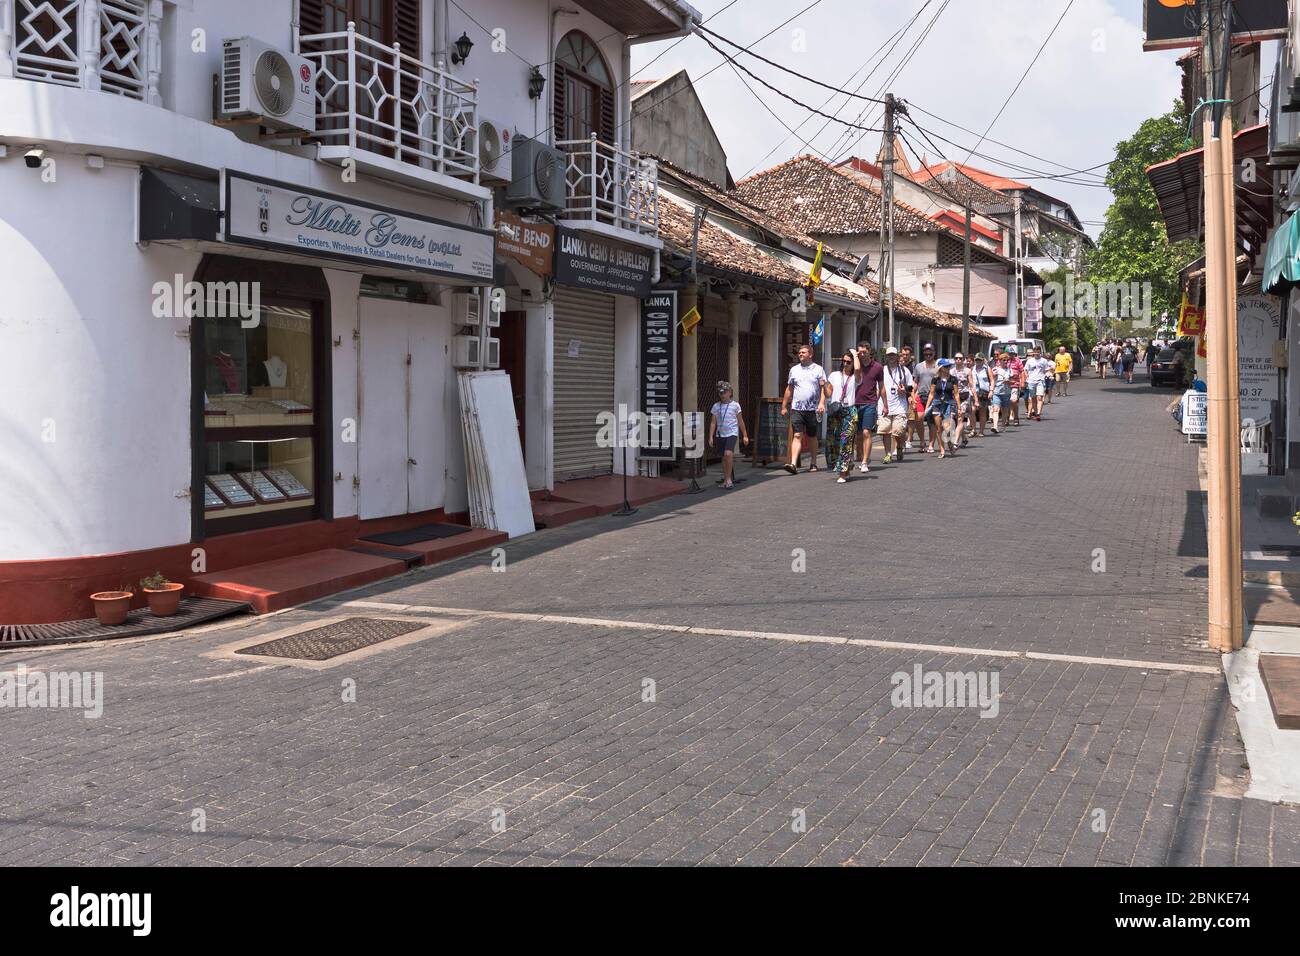 dh Shops in street GALLE FORT SRI LANKA ASIA Tourist guided tour people guide tourists excursion Stock Photo